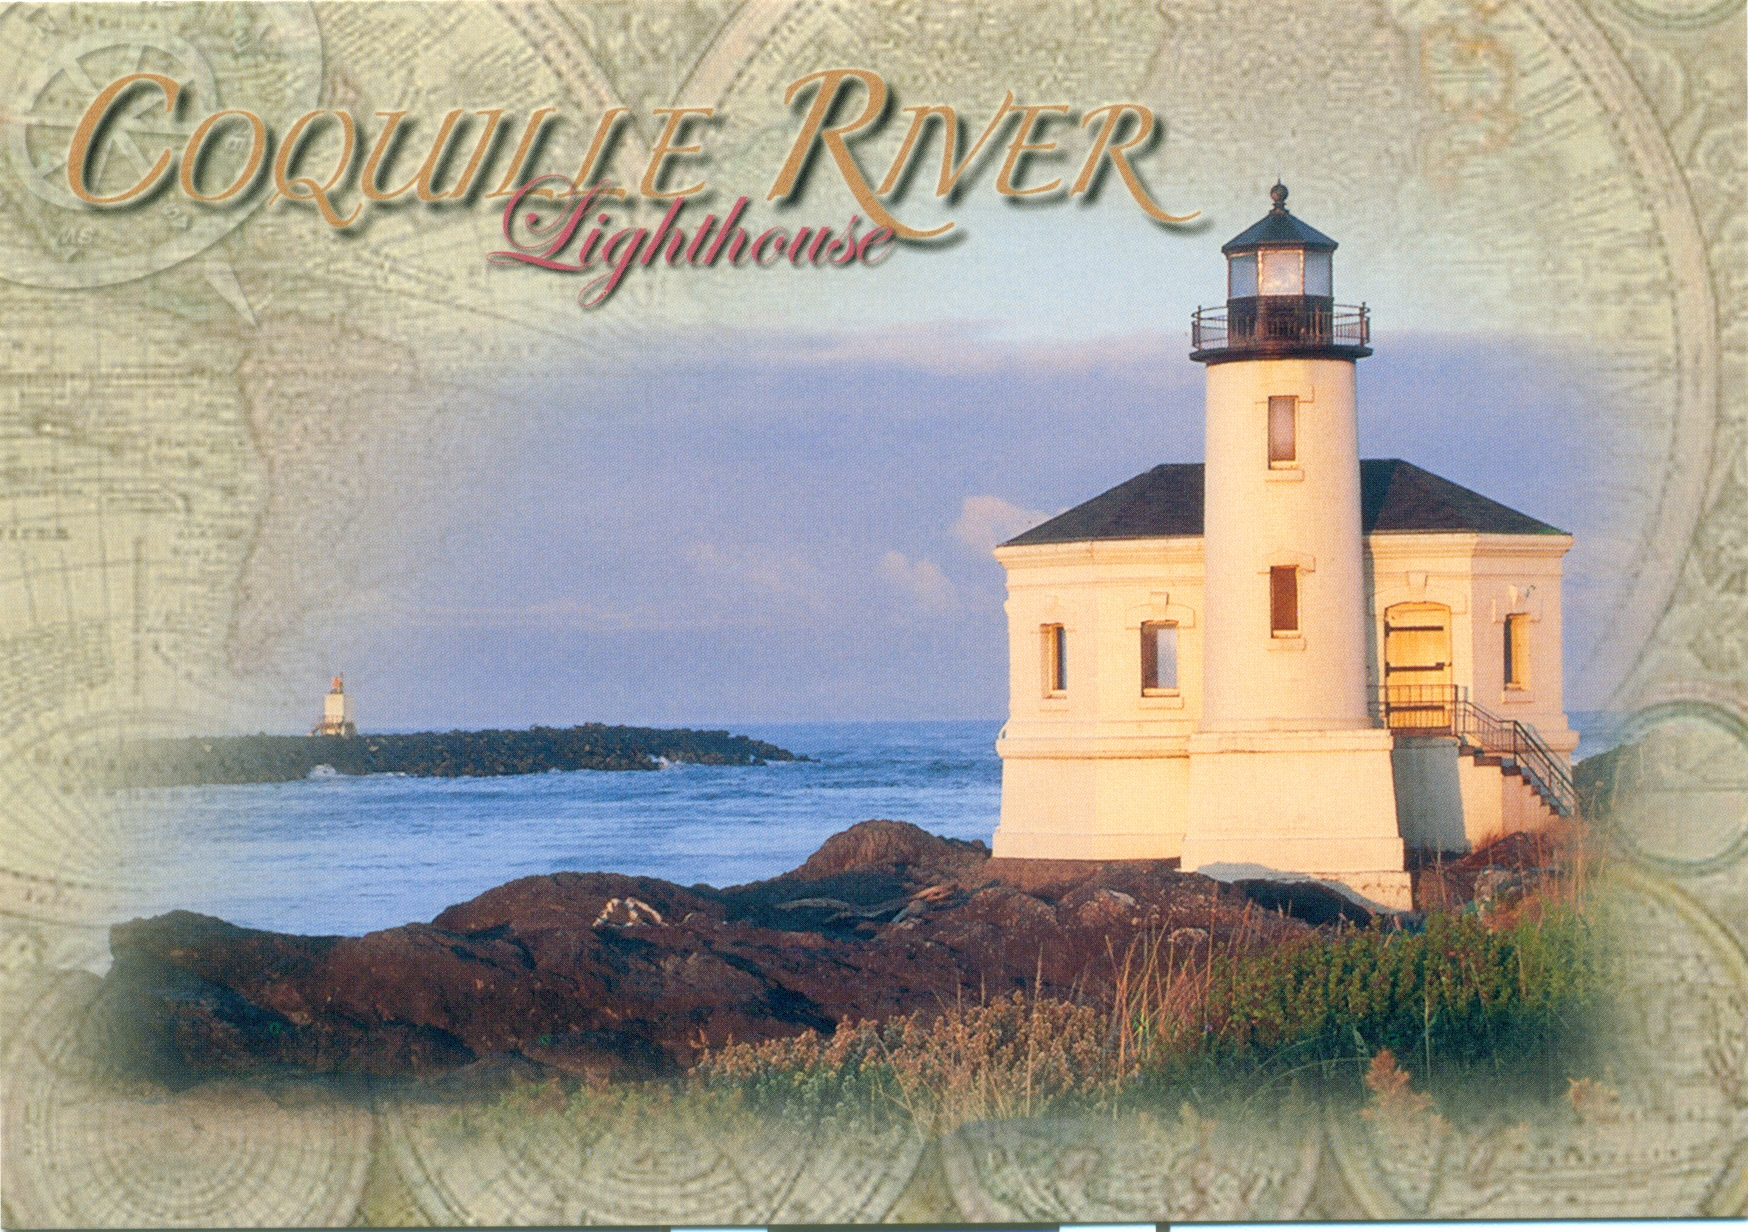 Coquille River Lighthouse Postcard #1708 (OR)